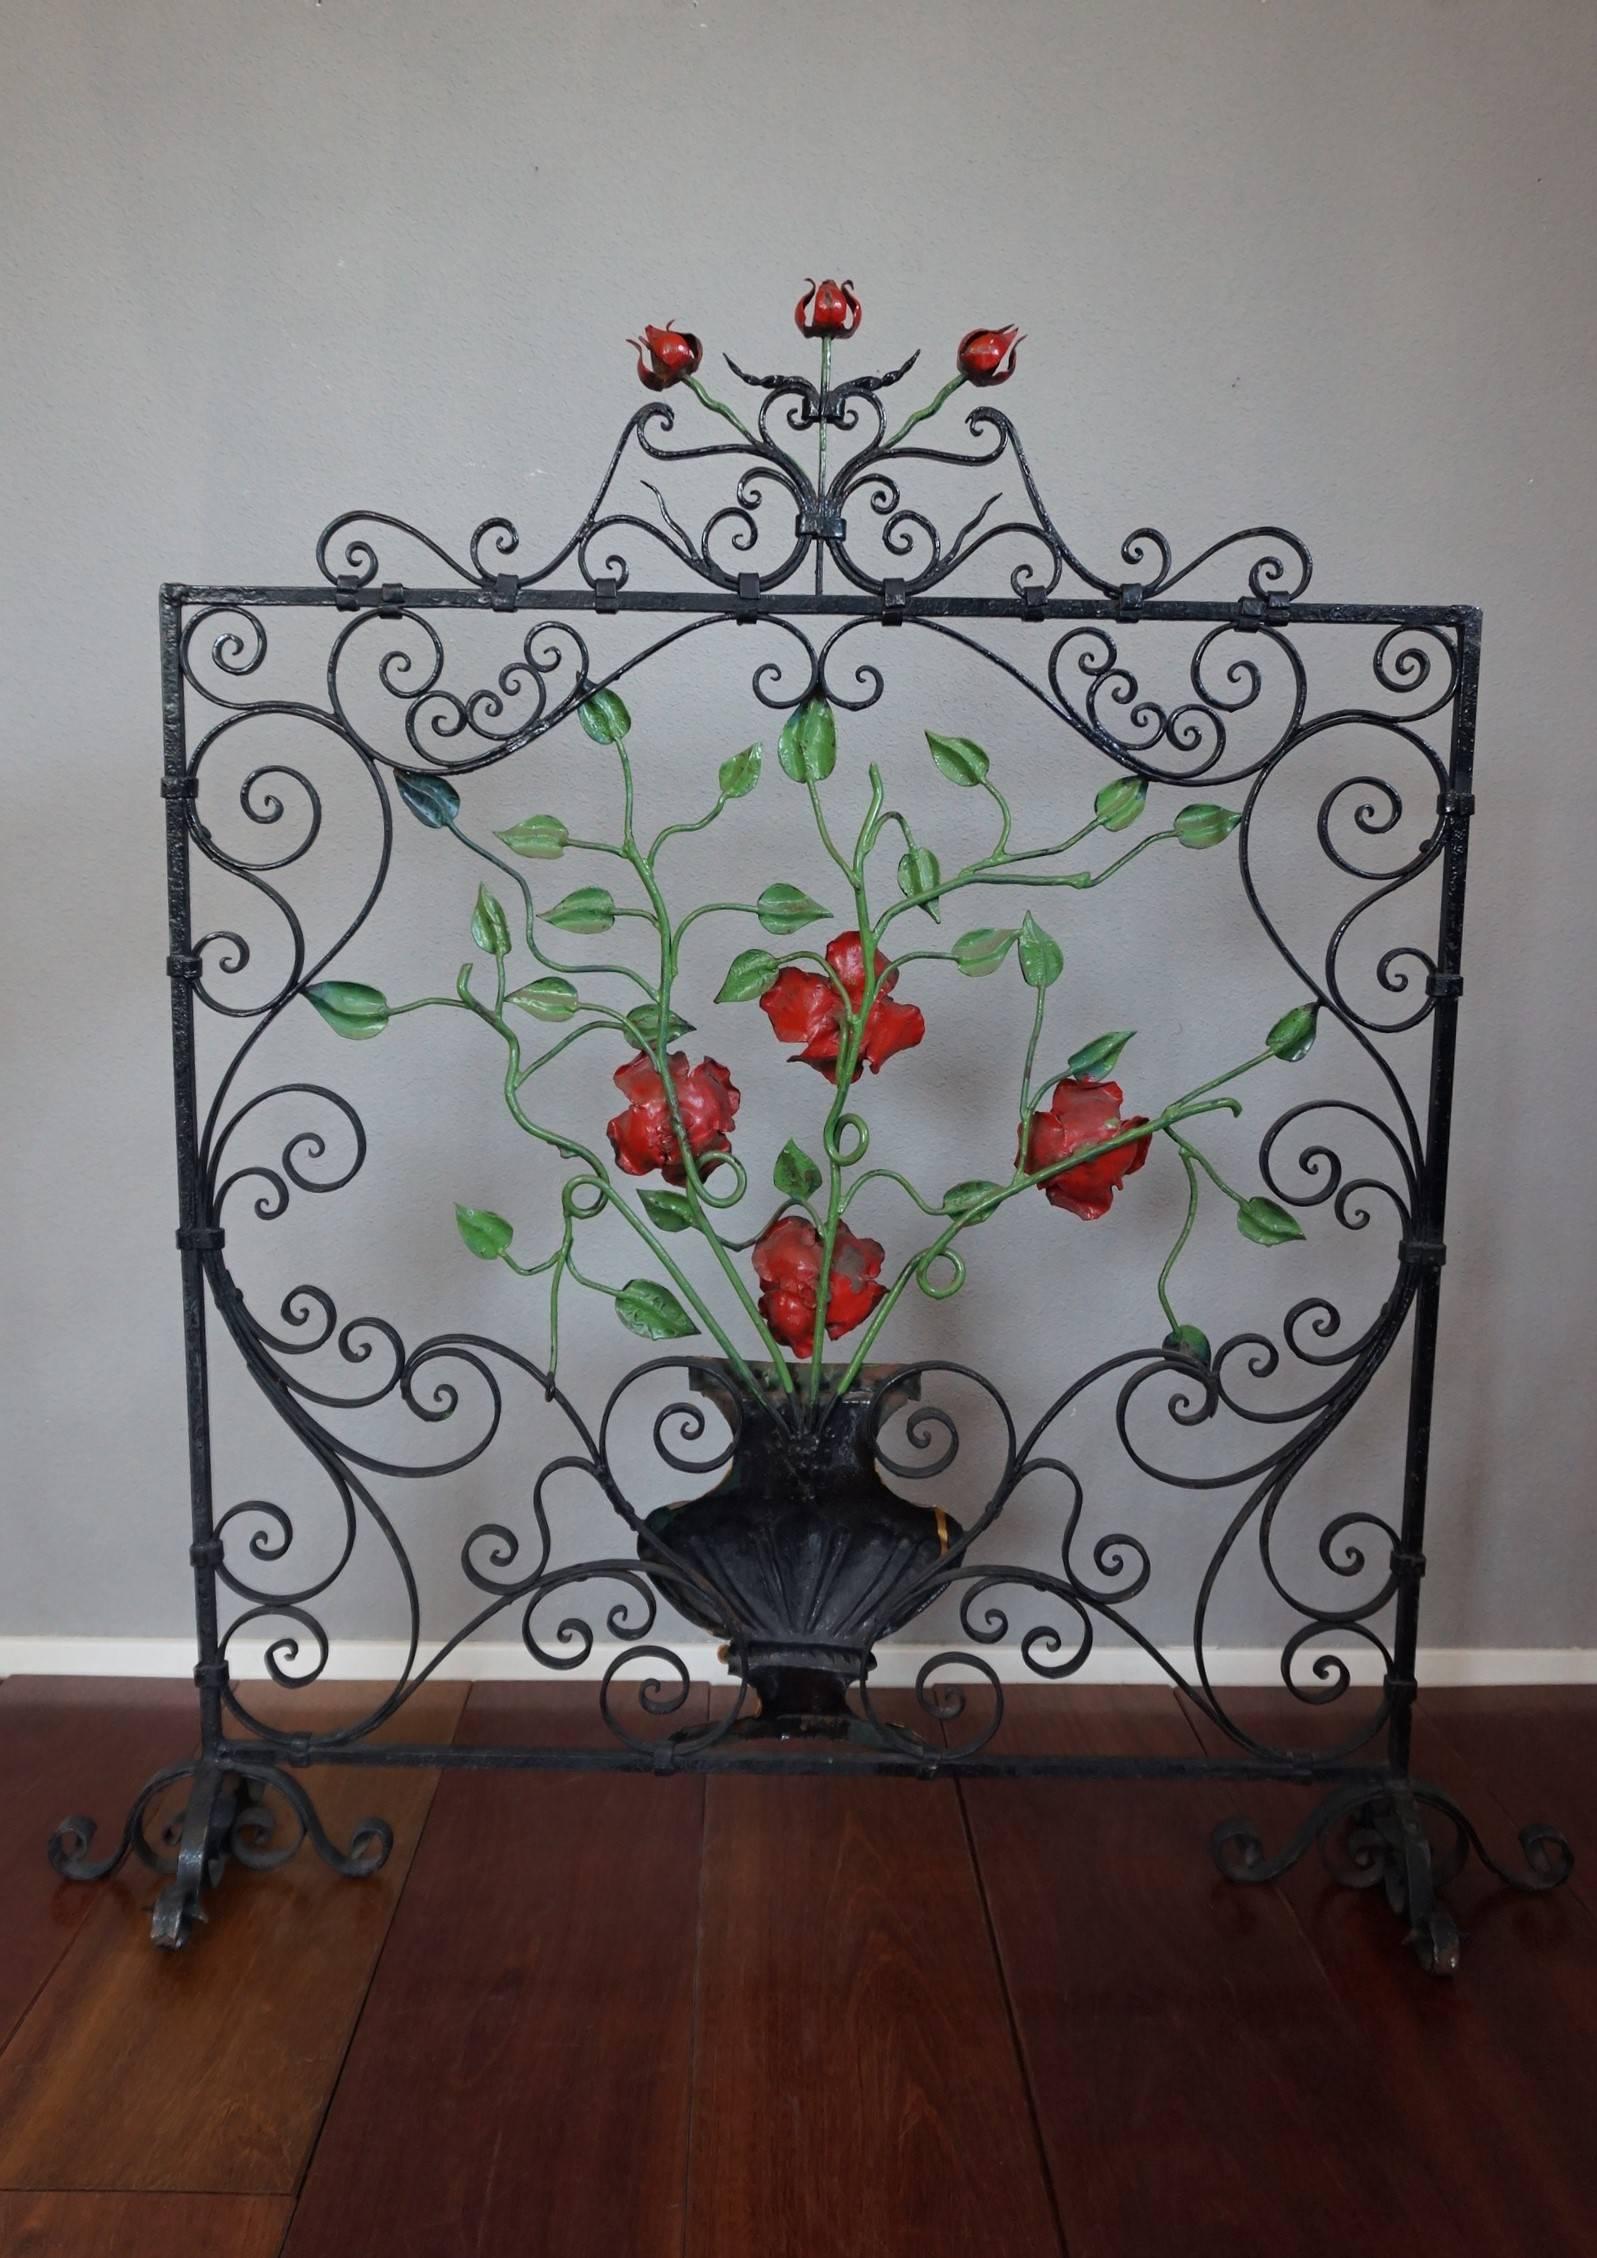 Early 20th Century Handcrafted Wrought Iron Firescreen with Roses in Vase Decor 4